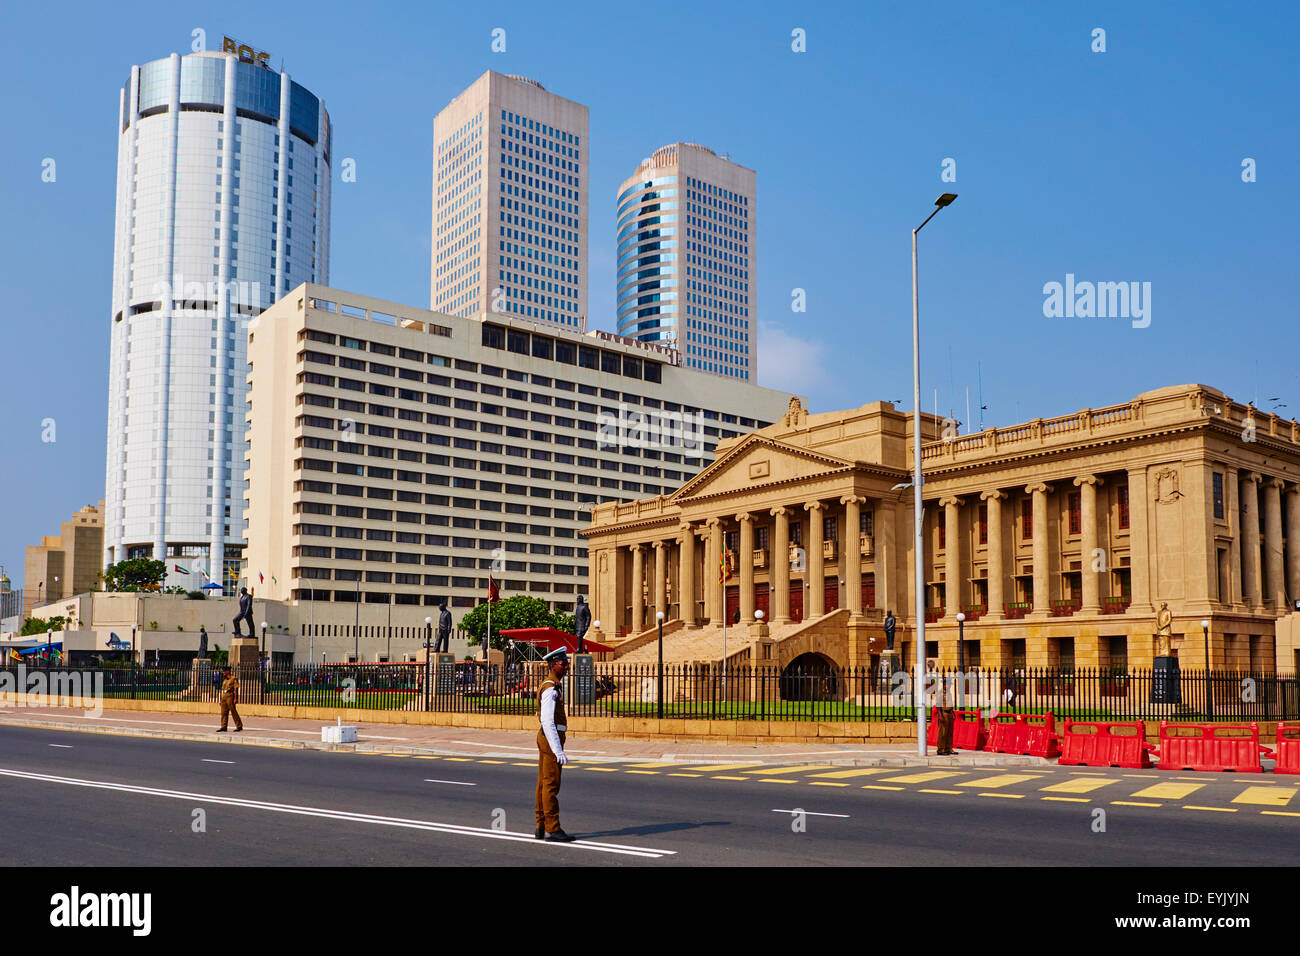 Sri Lanka, Colombo, Old city, Fort, Ancient Parliament Building Stock Photo